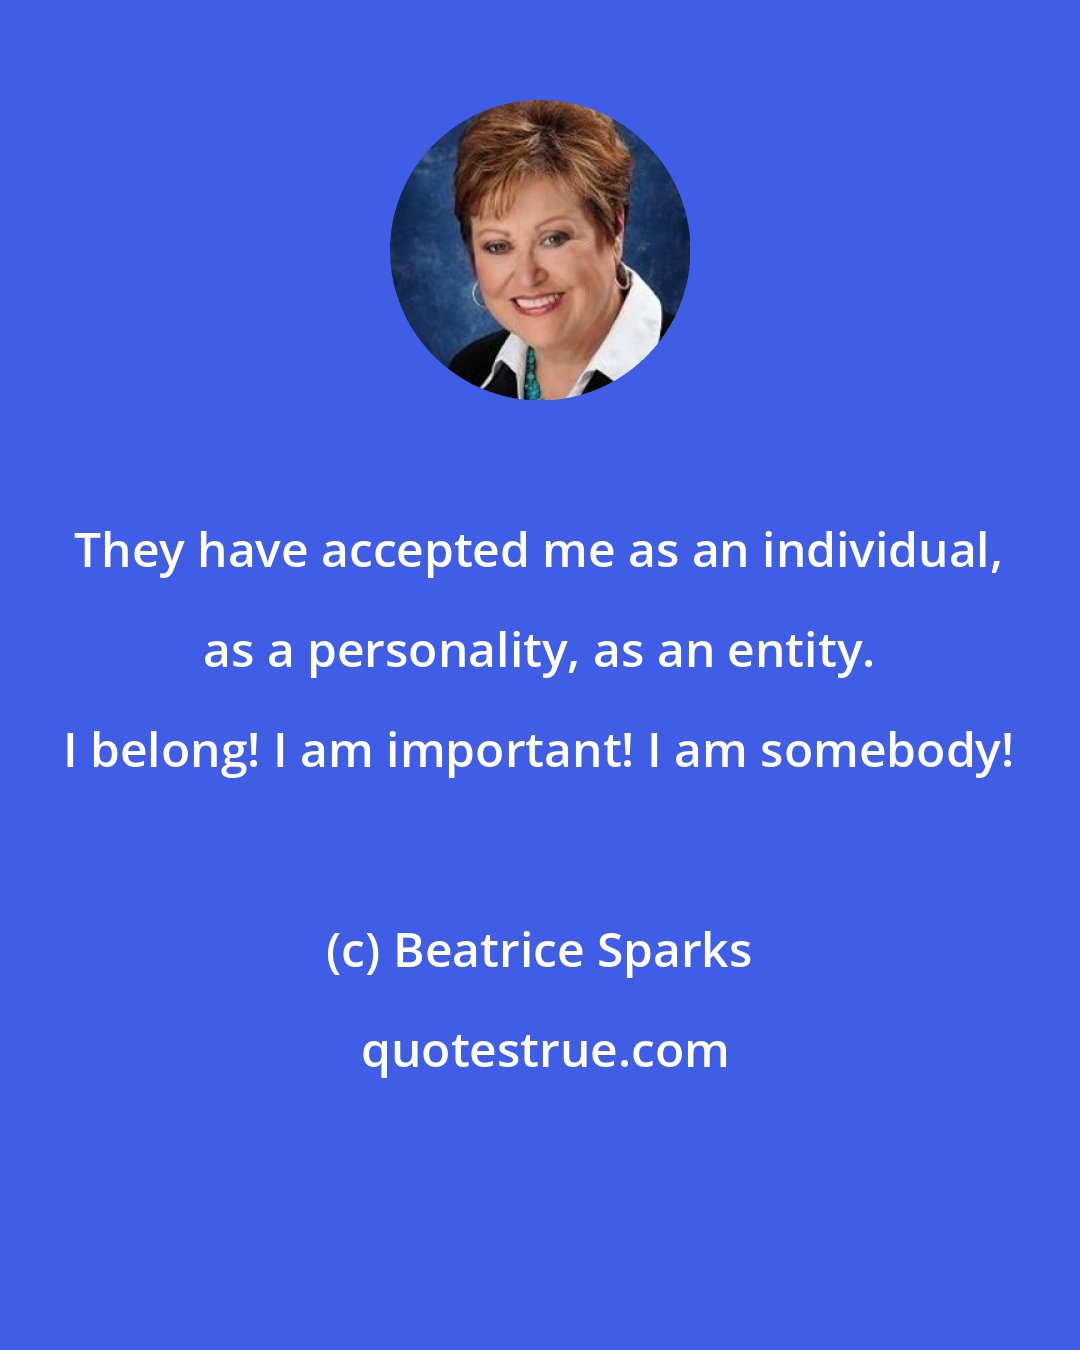 Beatrice Sparks: They have accepted me as an individual, as a personality, as an entity. I belong! I am important! I am somebody!